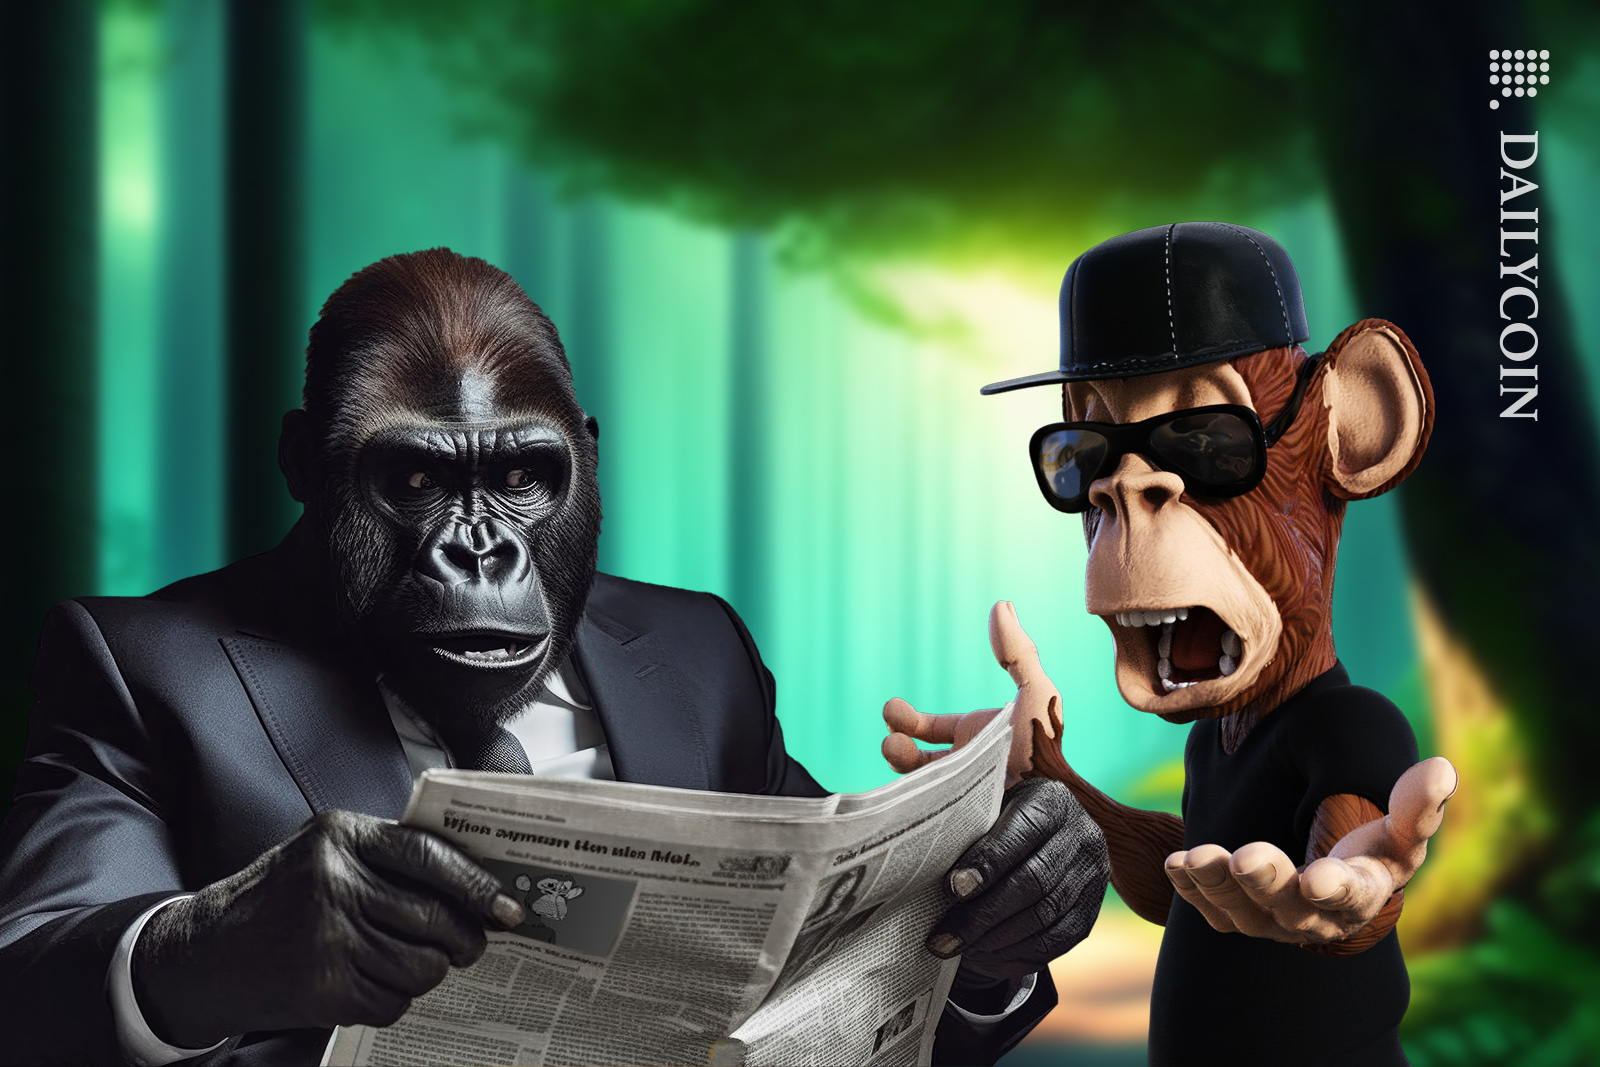 Bored Ape and his manager are shocked to see the news, in the newspaper.